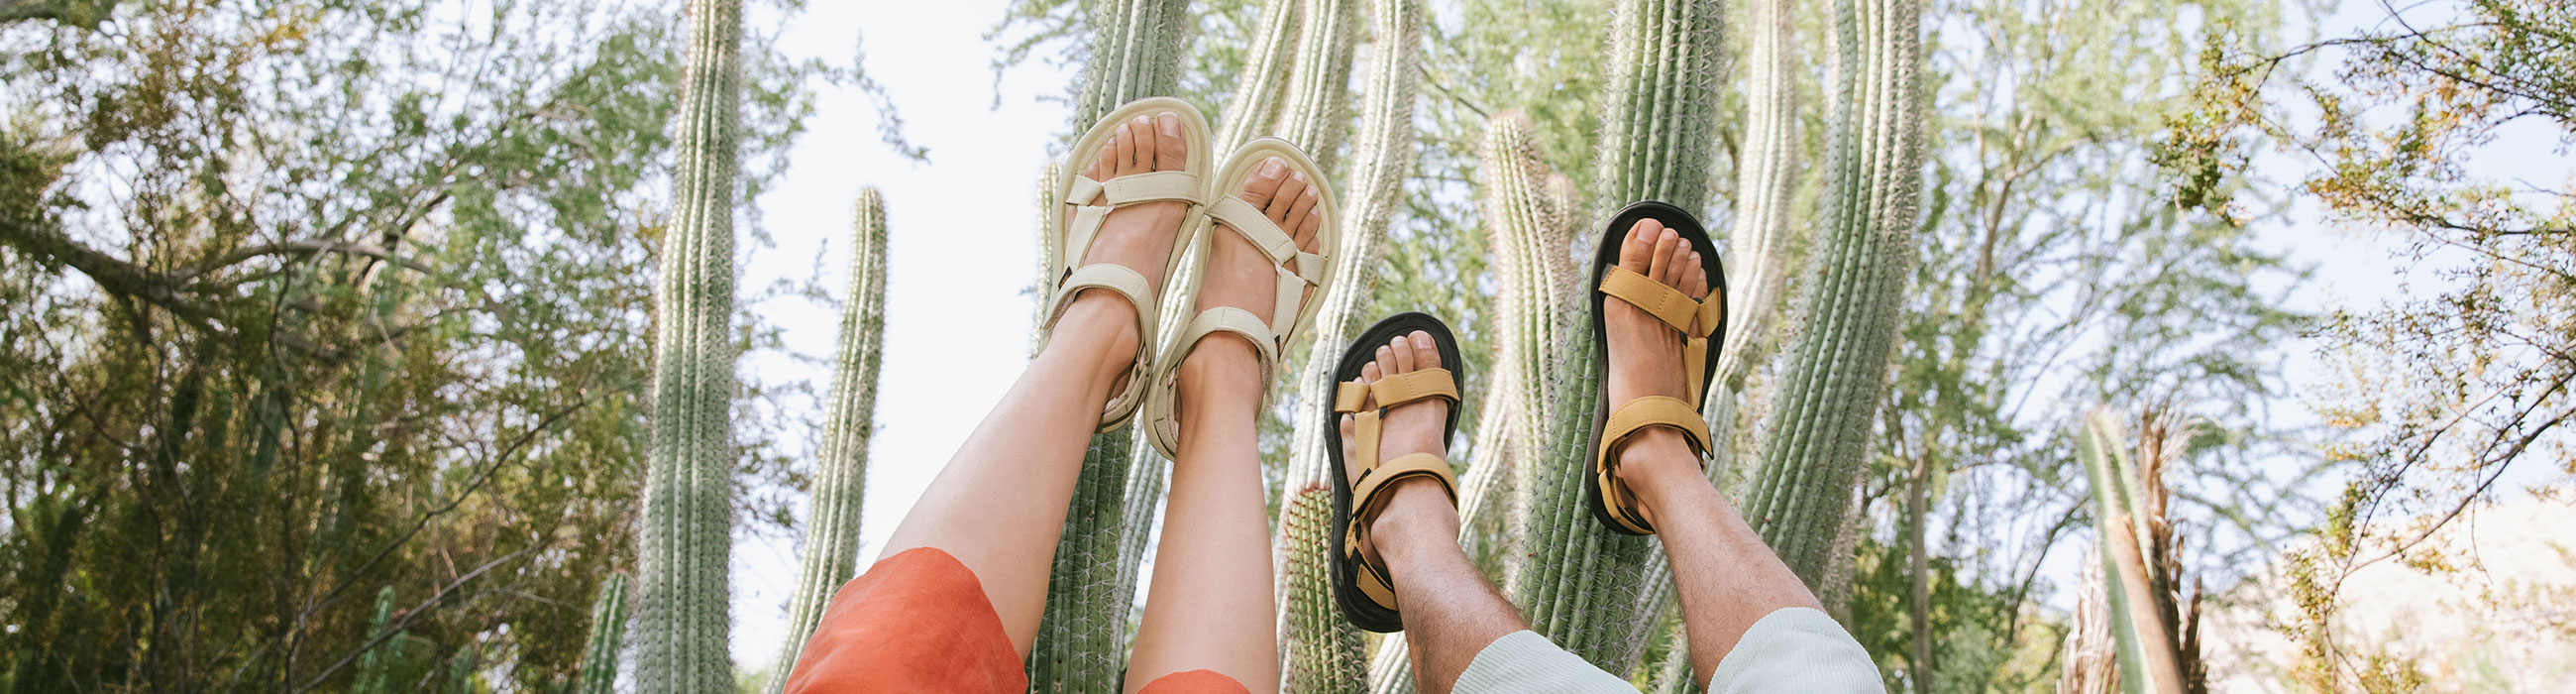 two people with sandals in the air in front of cactus